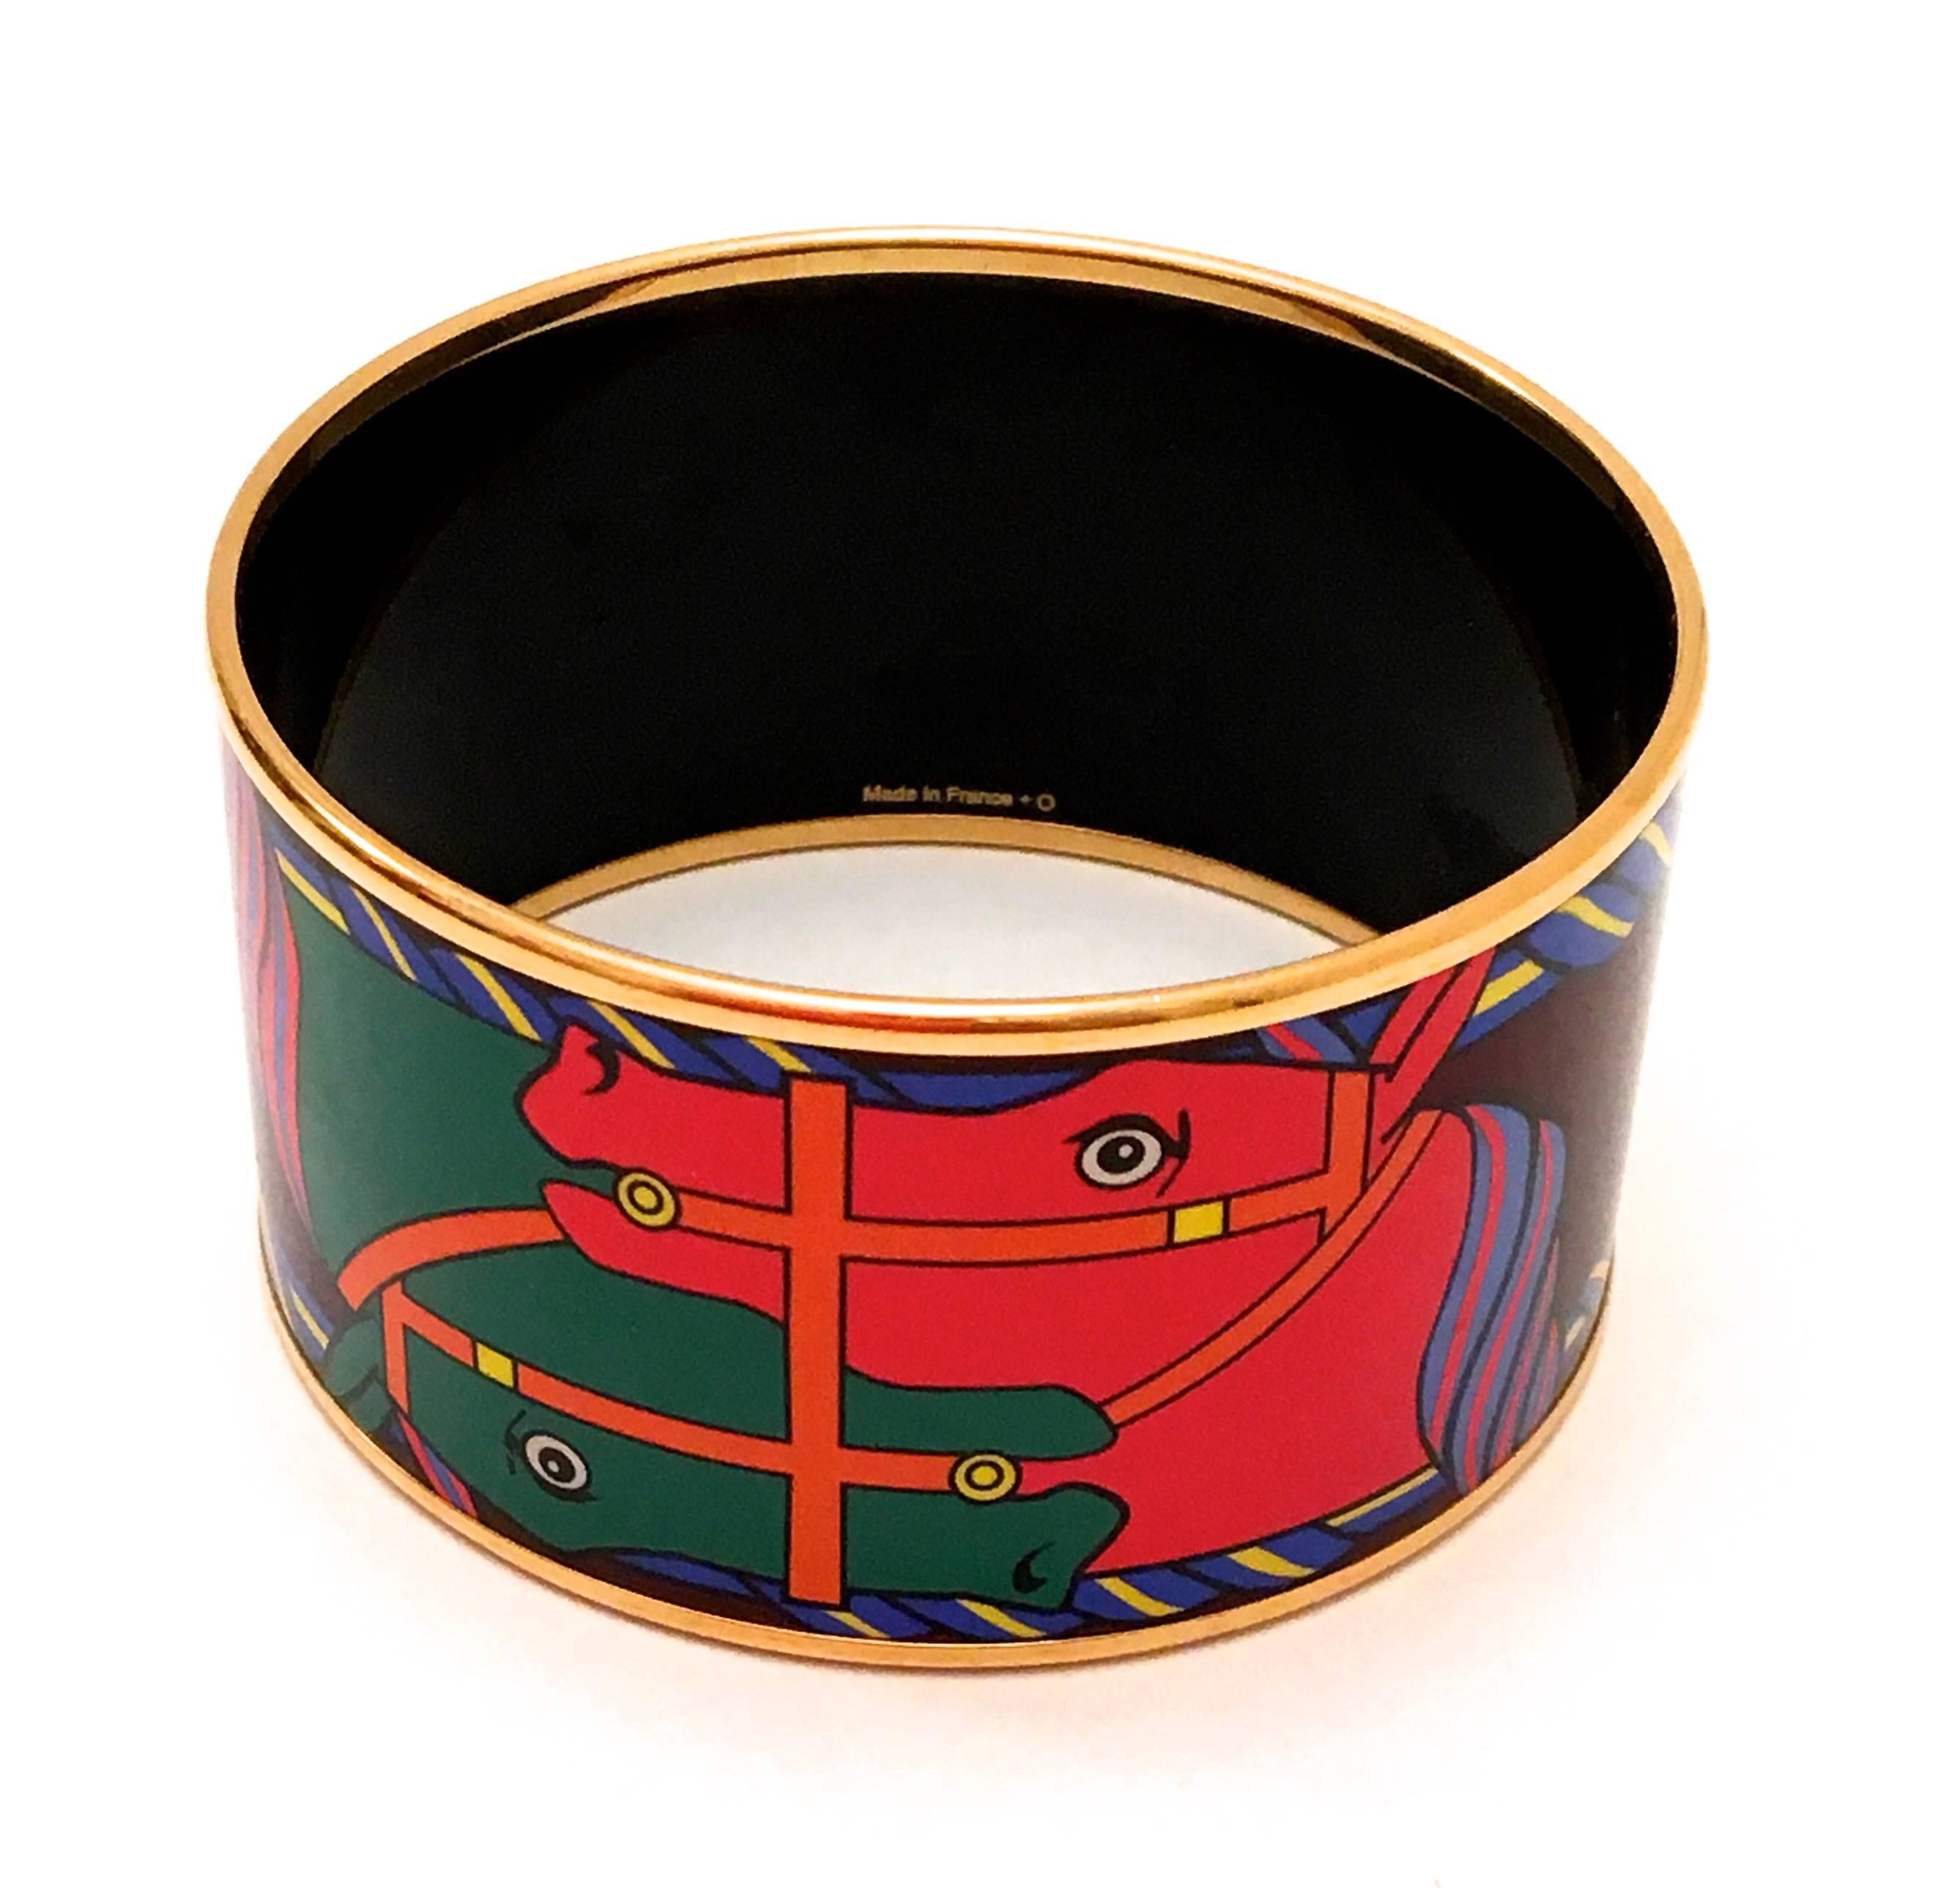 Presented here is a beautiful enamel bracelet from Hermes Paris. This bracelet is comprised of a equestrian horse print in colors of red, purple, blue, yellow, orange and green. The size is 'Extra Wide.' On the interior the words 'The Big Bangle' is